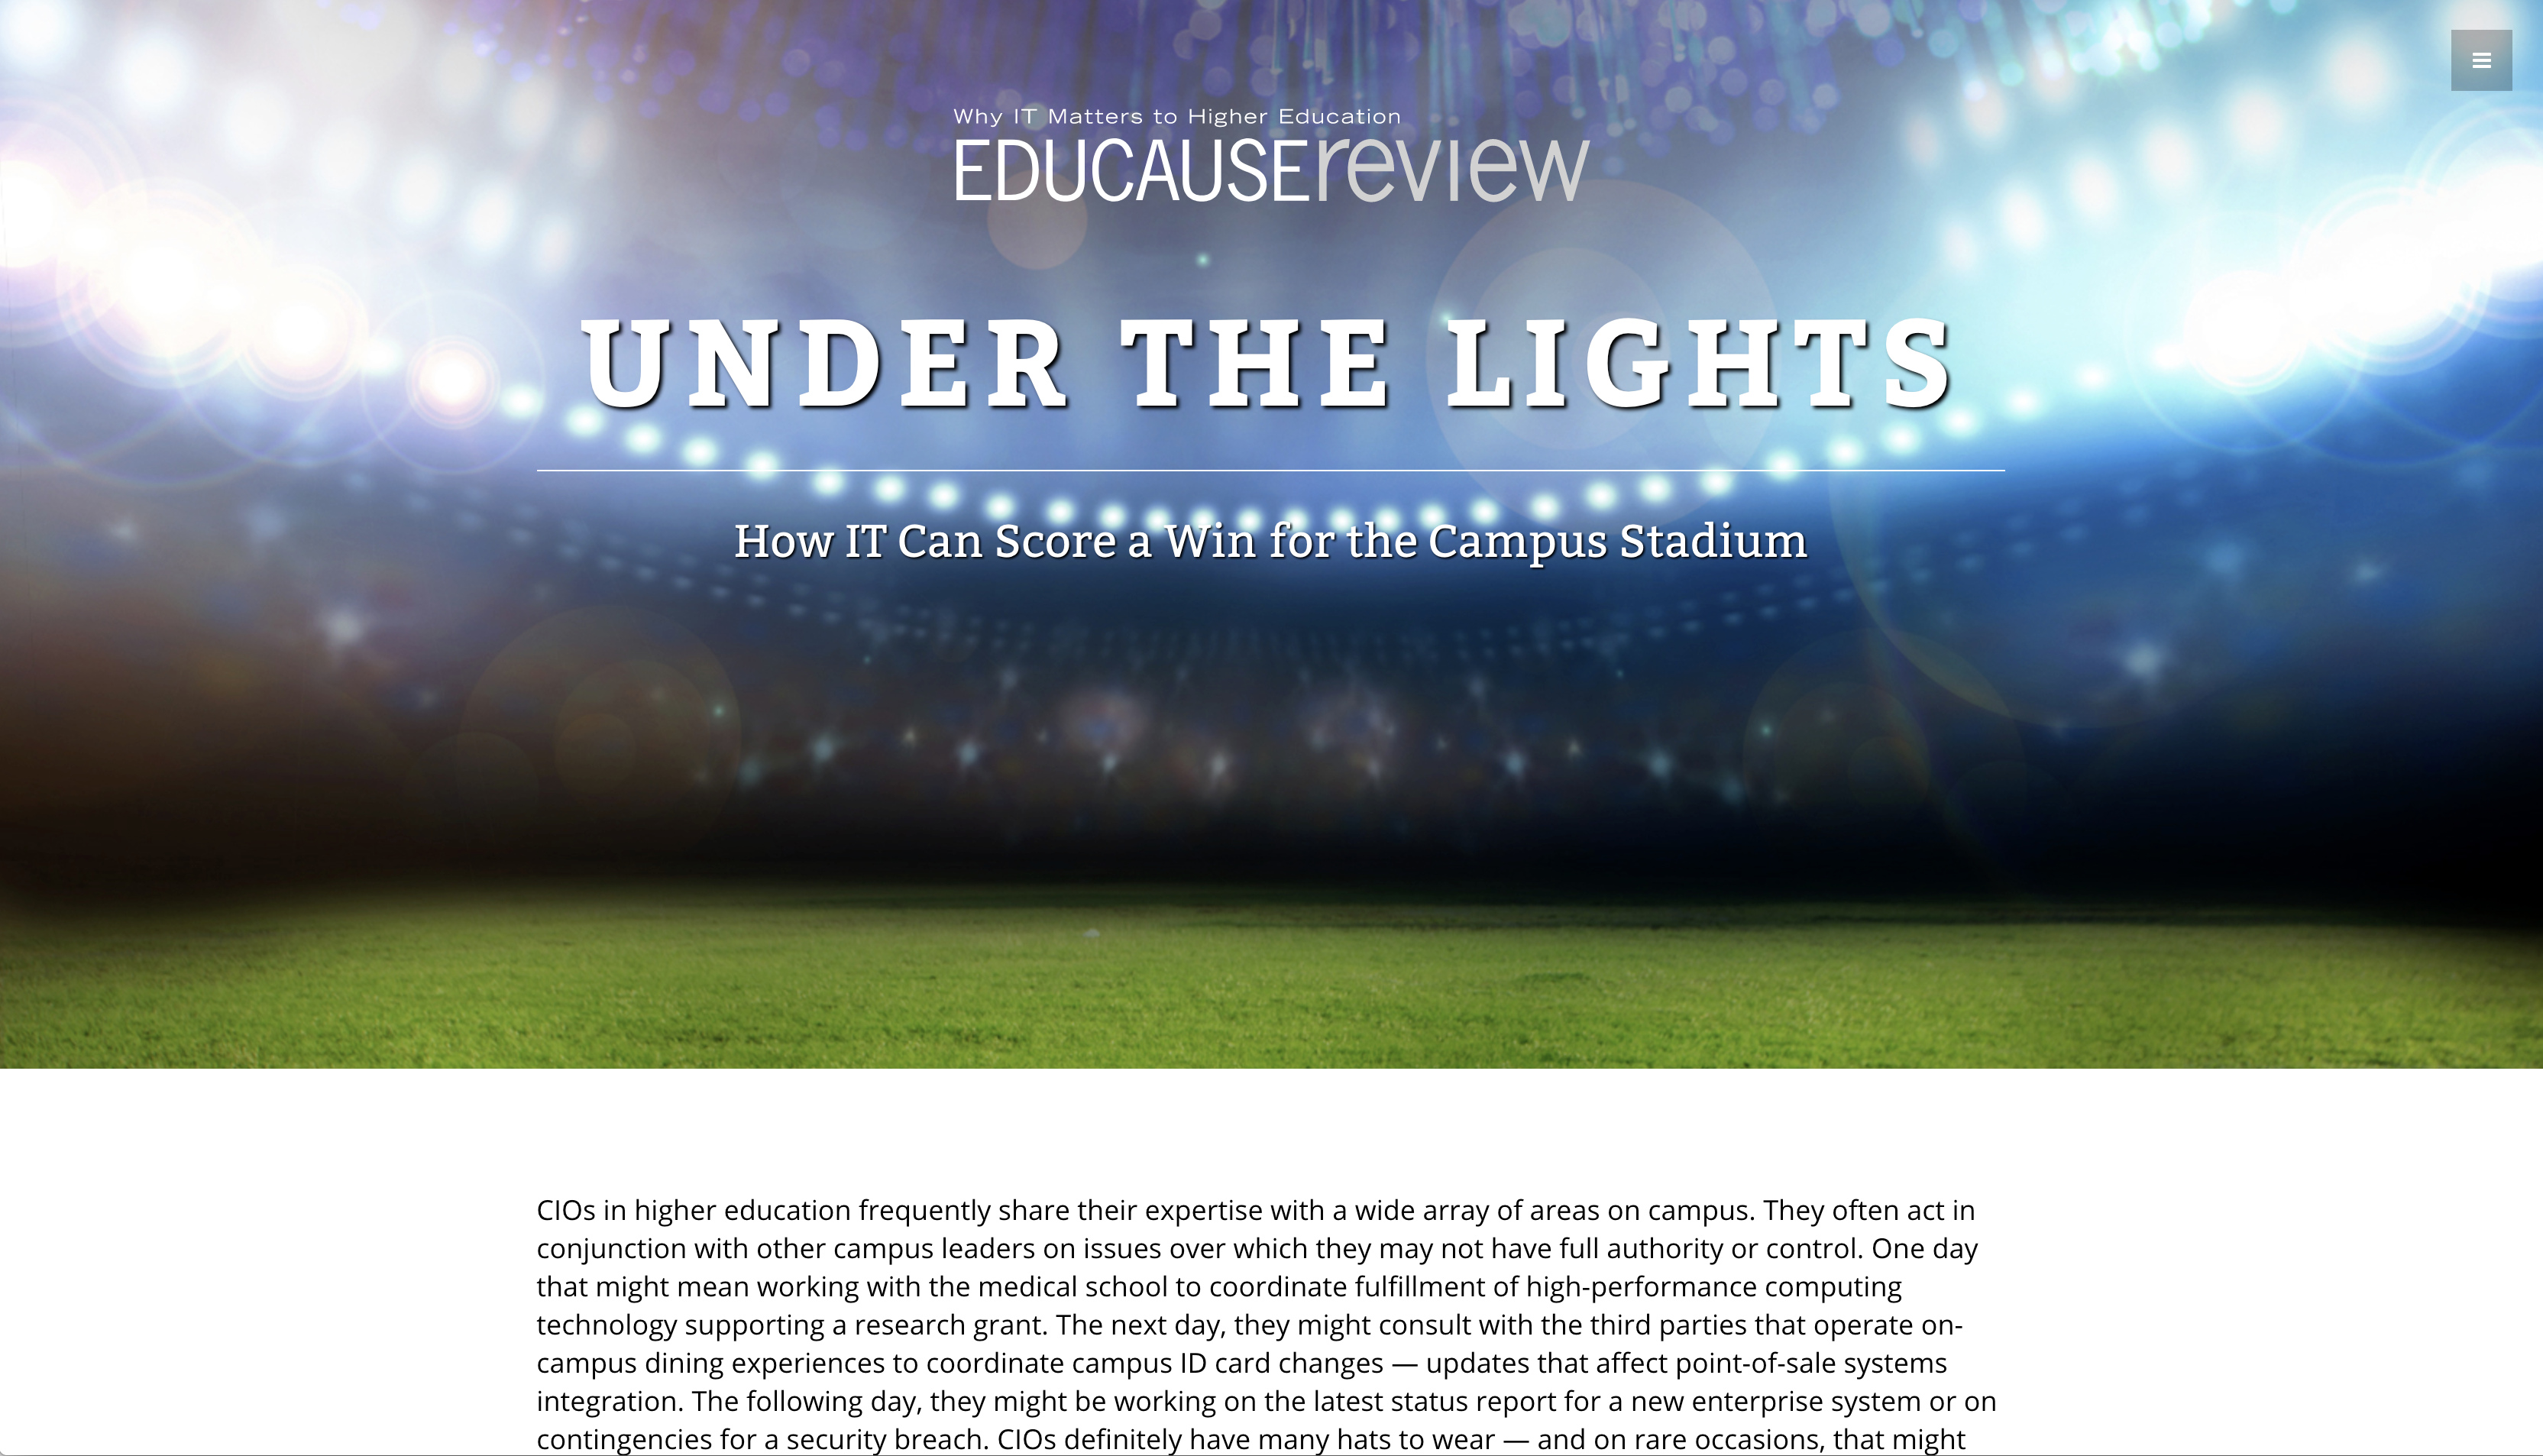 Under the Lights - How IT Can Score a Win for the Campus Stadium